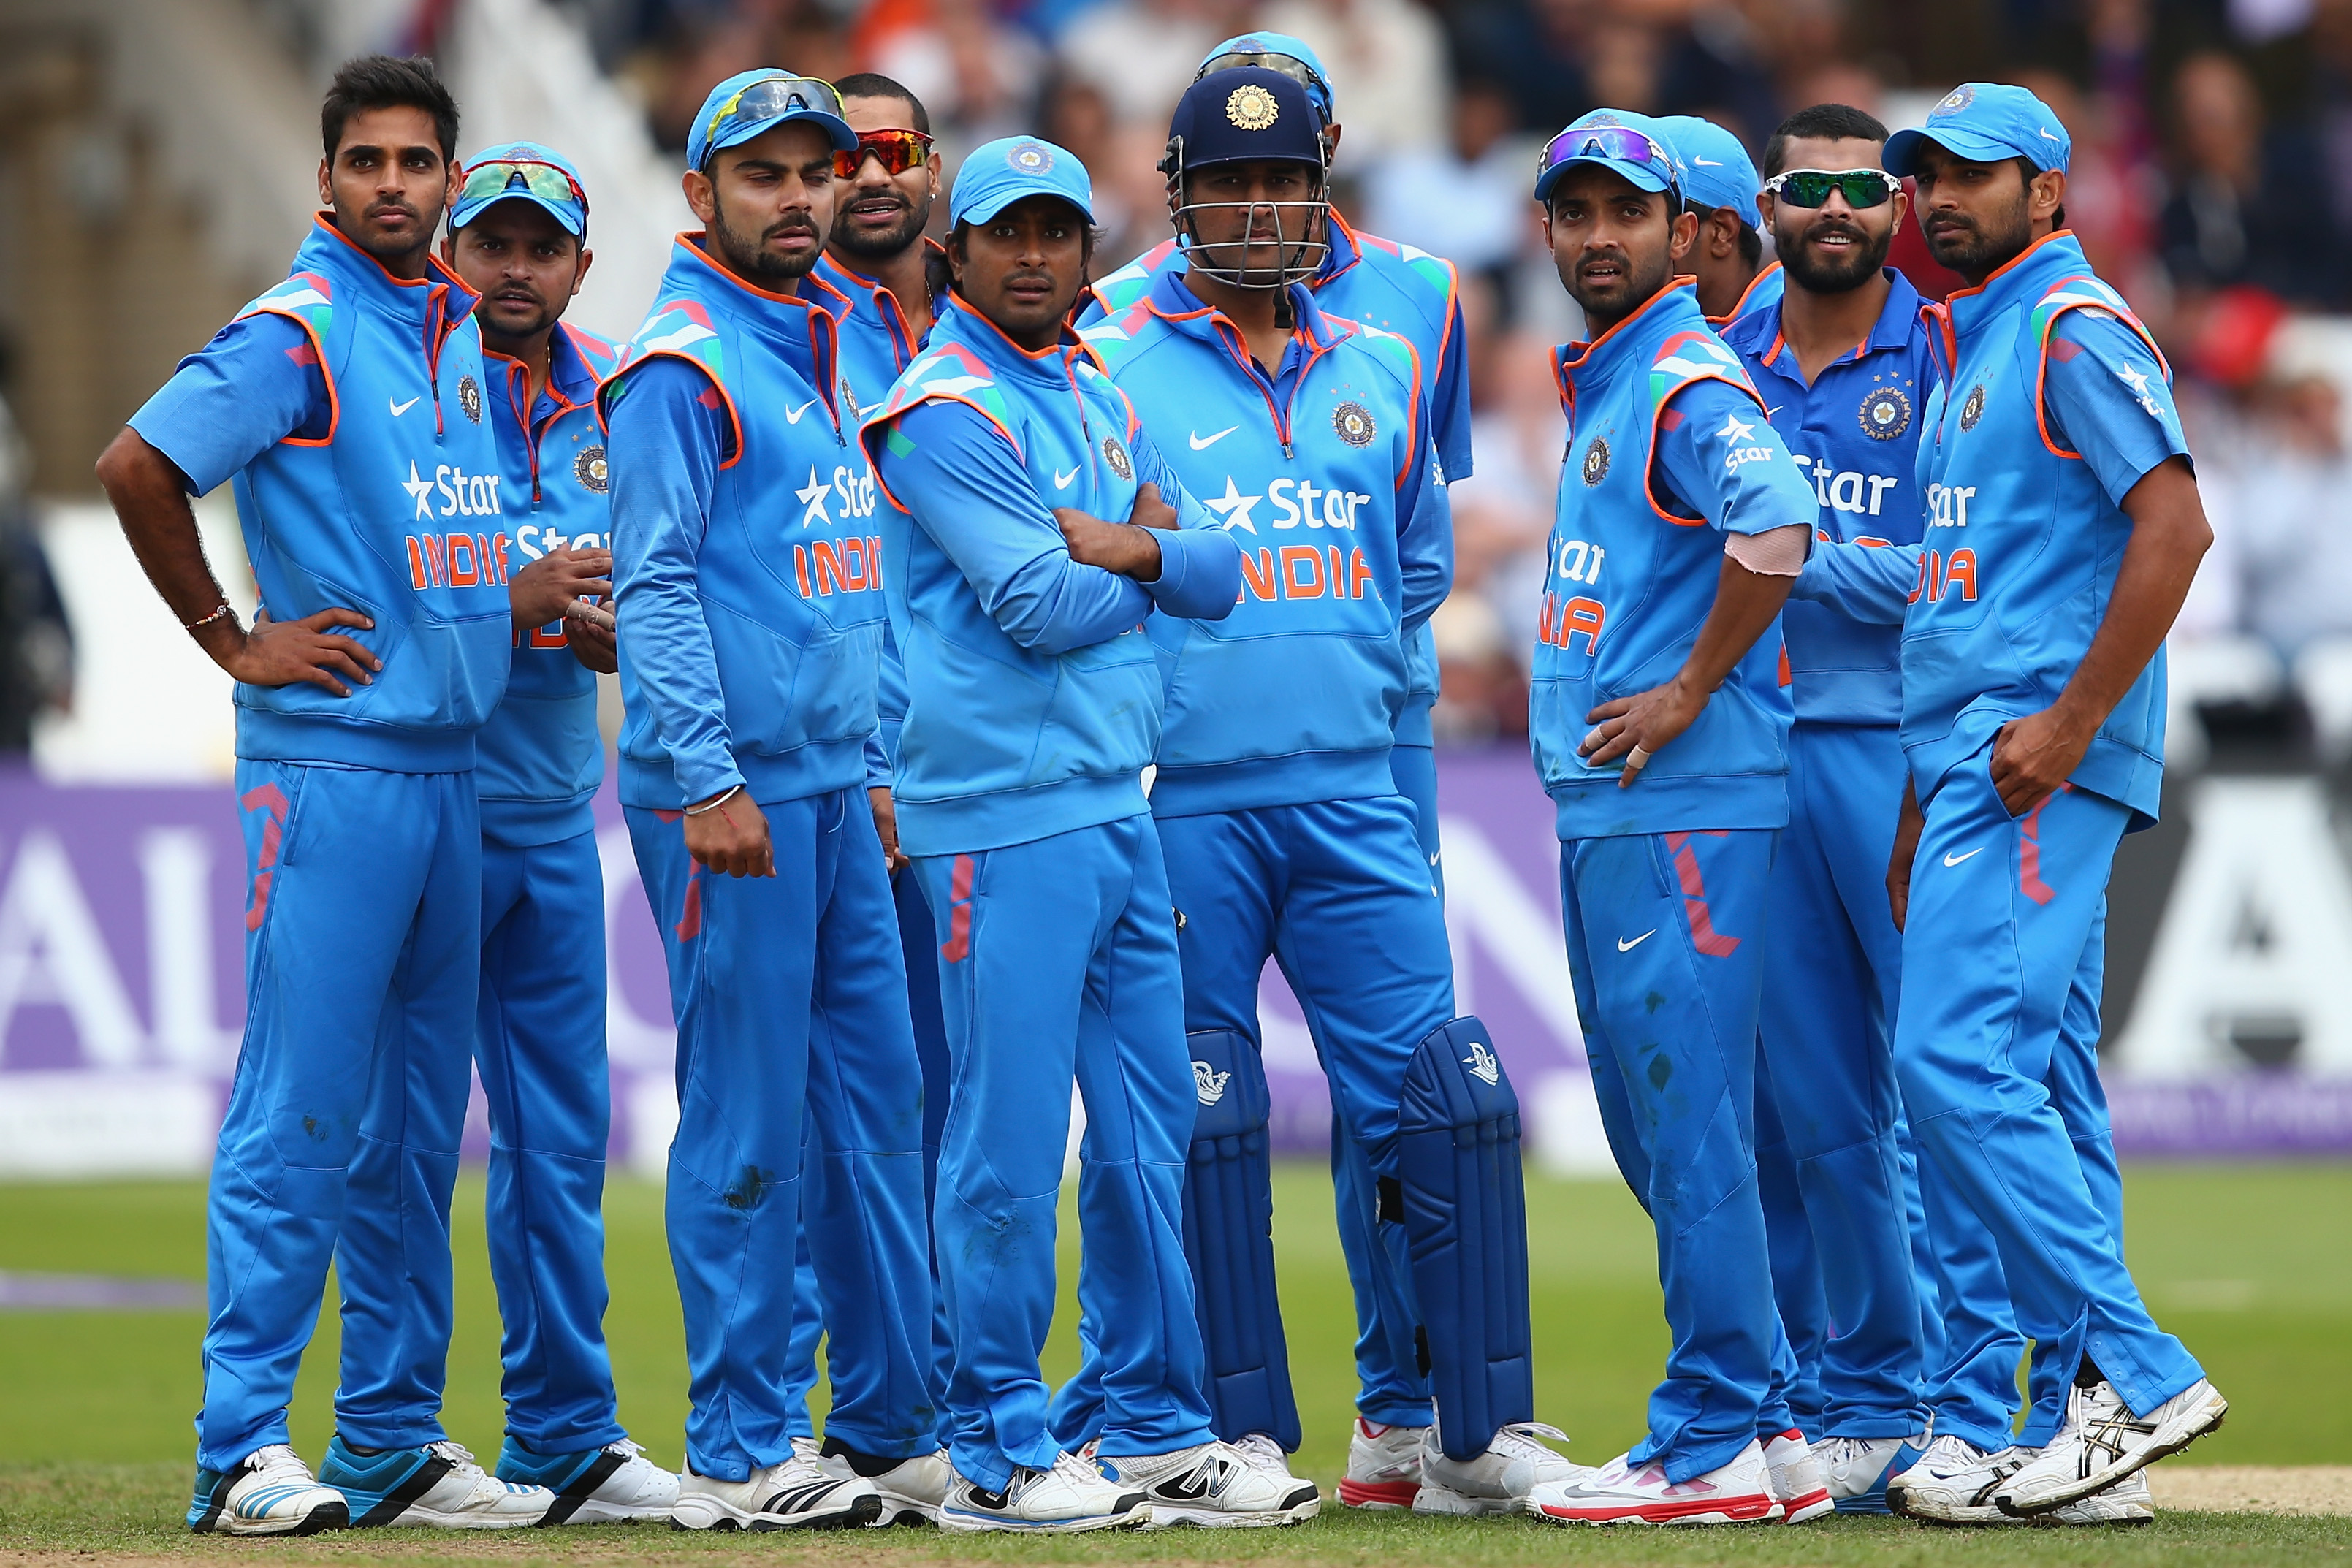 ICC Champions Trophy | Group B: Detailed analysis and Predictions